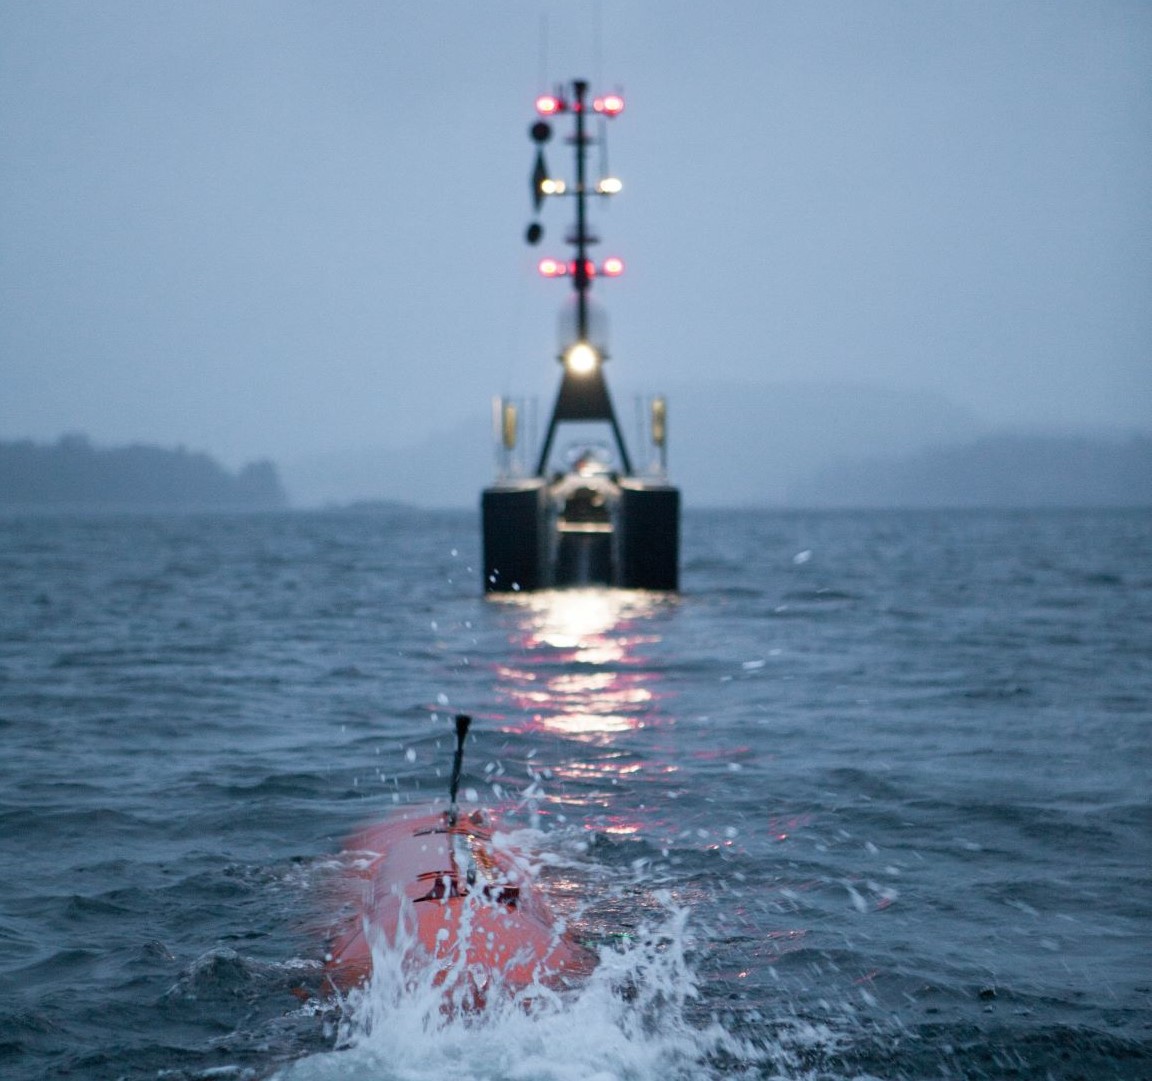 USV which can deploy remotely operated vehicles (ROVs) and autonomous underwater vehicles (AUVs)